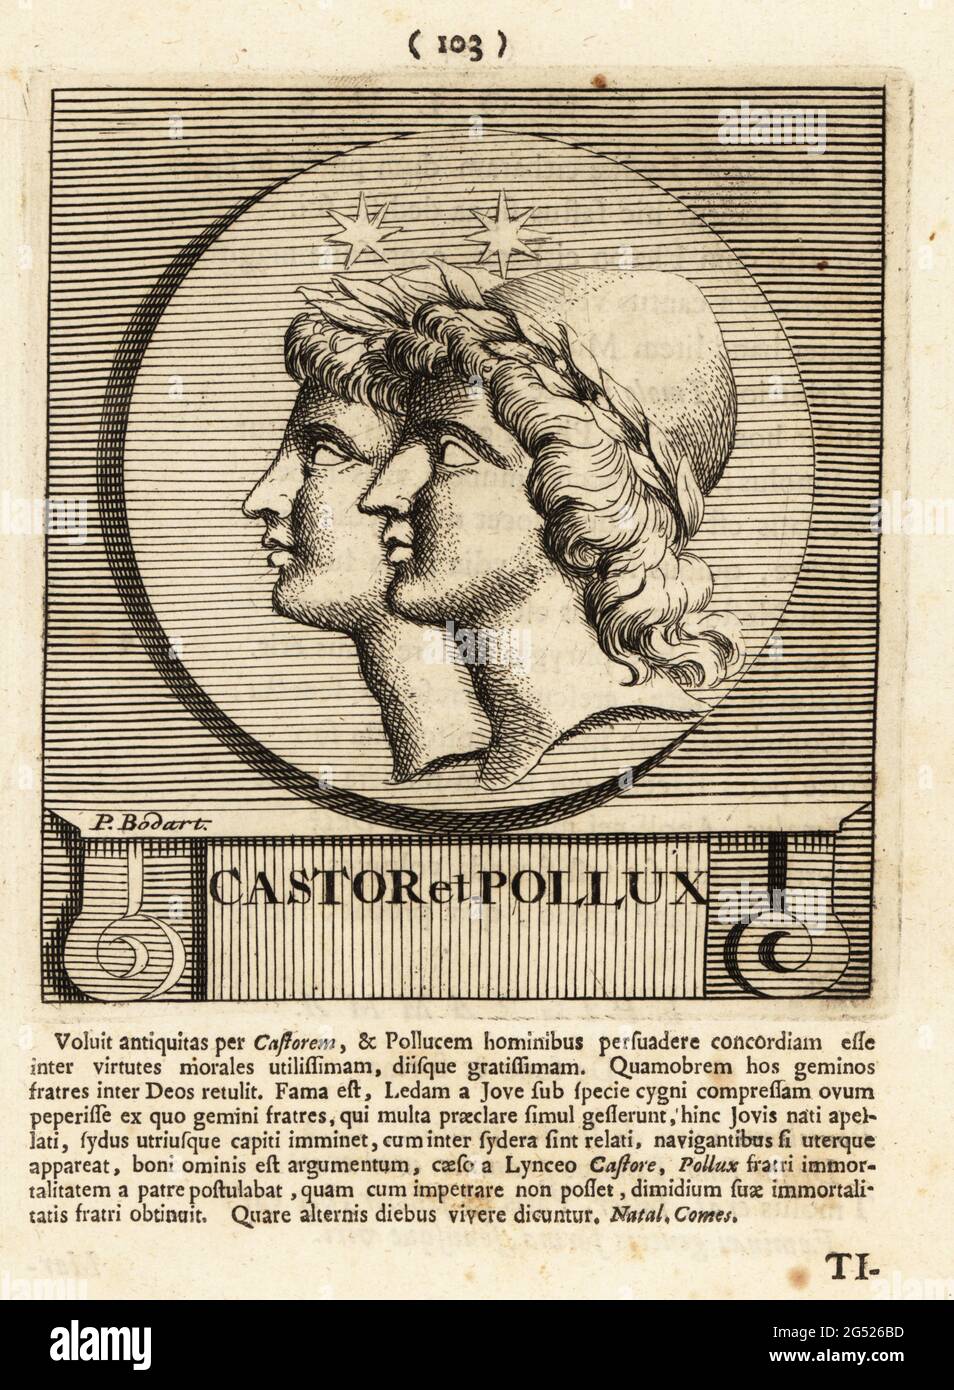 Castor and Pollux, twin half-brothers in Roman mythology, Polydeukes in Greek myth, known together as the Dioscuri. Copperplate engraving by Pieter Bodart (1676-1712) from Henricus Spoor’s Deorum et Heroum, Virorum et Mulierum Illustrium Imagines Antiquae Illustatae, Gods and Heroes, Men and Women, Illustrated with Antique Images, Petrum, Amsterdam, 1715. First published as Favissæ utriusque antiquitatis tam Romanæ quam Græcæ in 1707. Henricus Spoor was a Dutch physician, classical scholar, poet and writer, fl. 1694-1716. Stock Photo